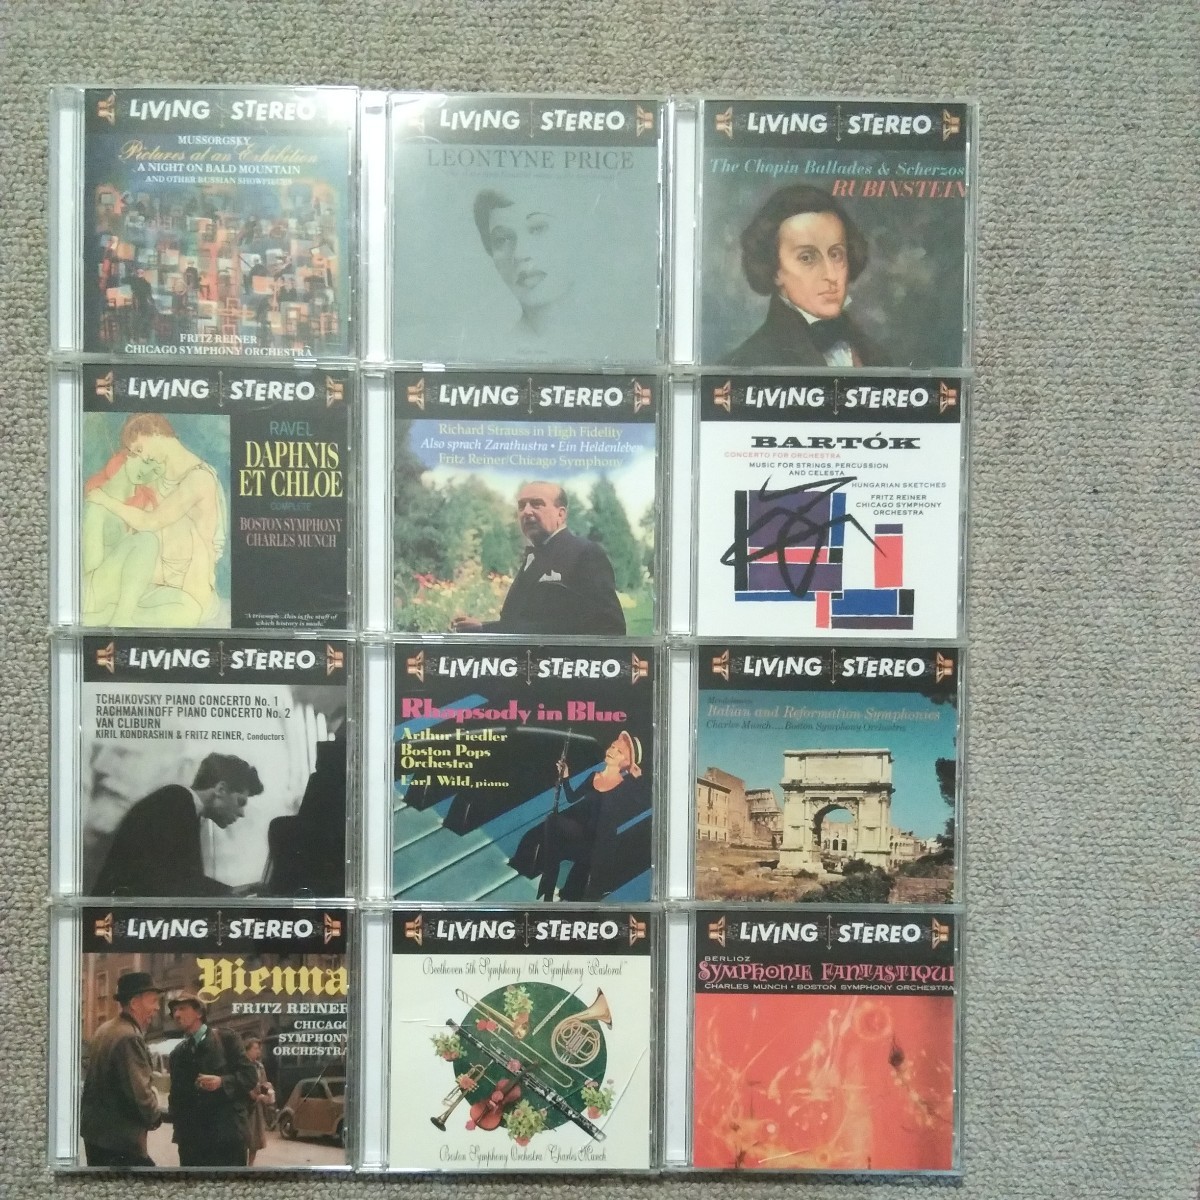 ■RCA VICTOR　60CD■　LIVING STEREO COLLECTION VOL.1　　60CDセット　※標準プラケース等に換装済み_画像7